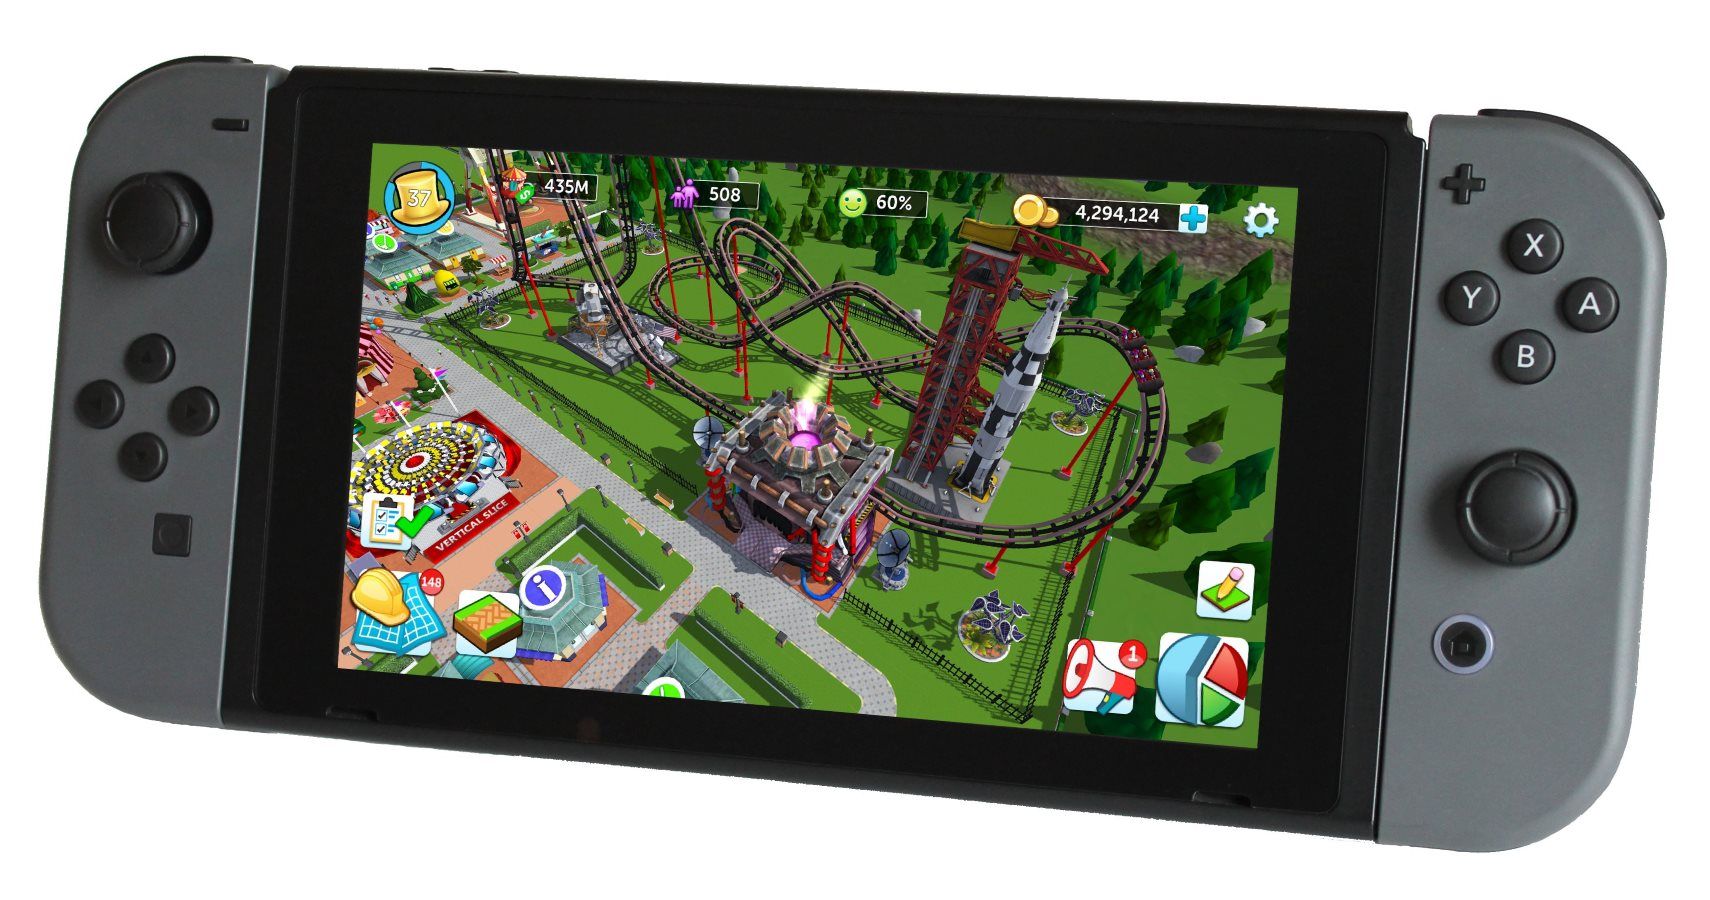 Atari Is Crowdfunding RollerCoaster Tycoon For The Switch